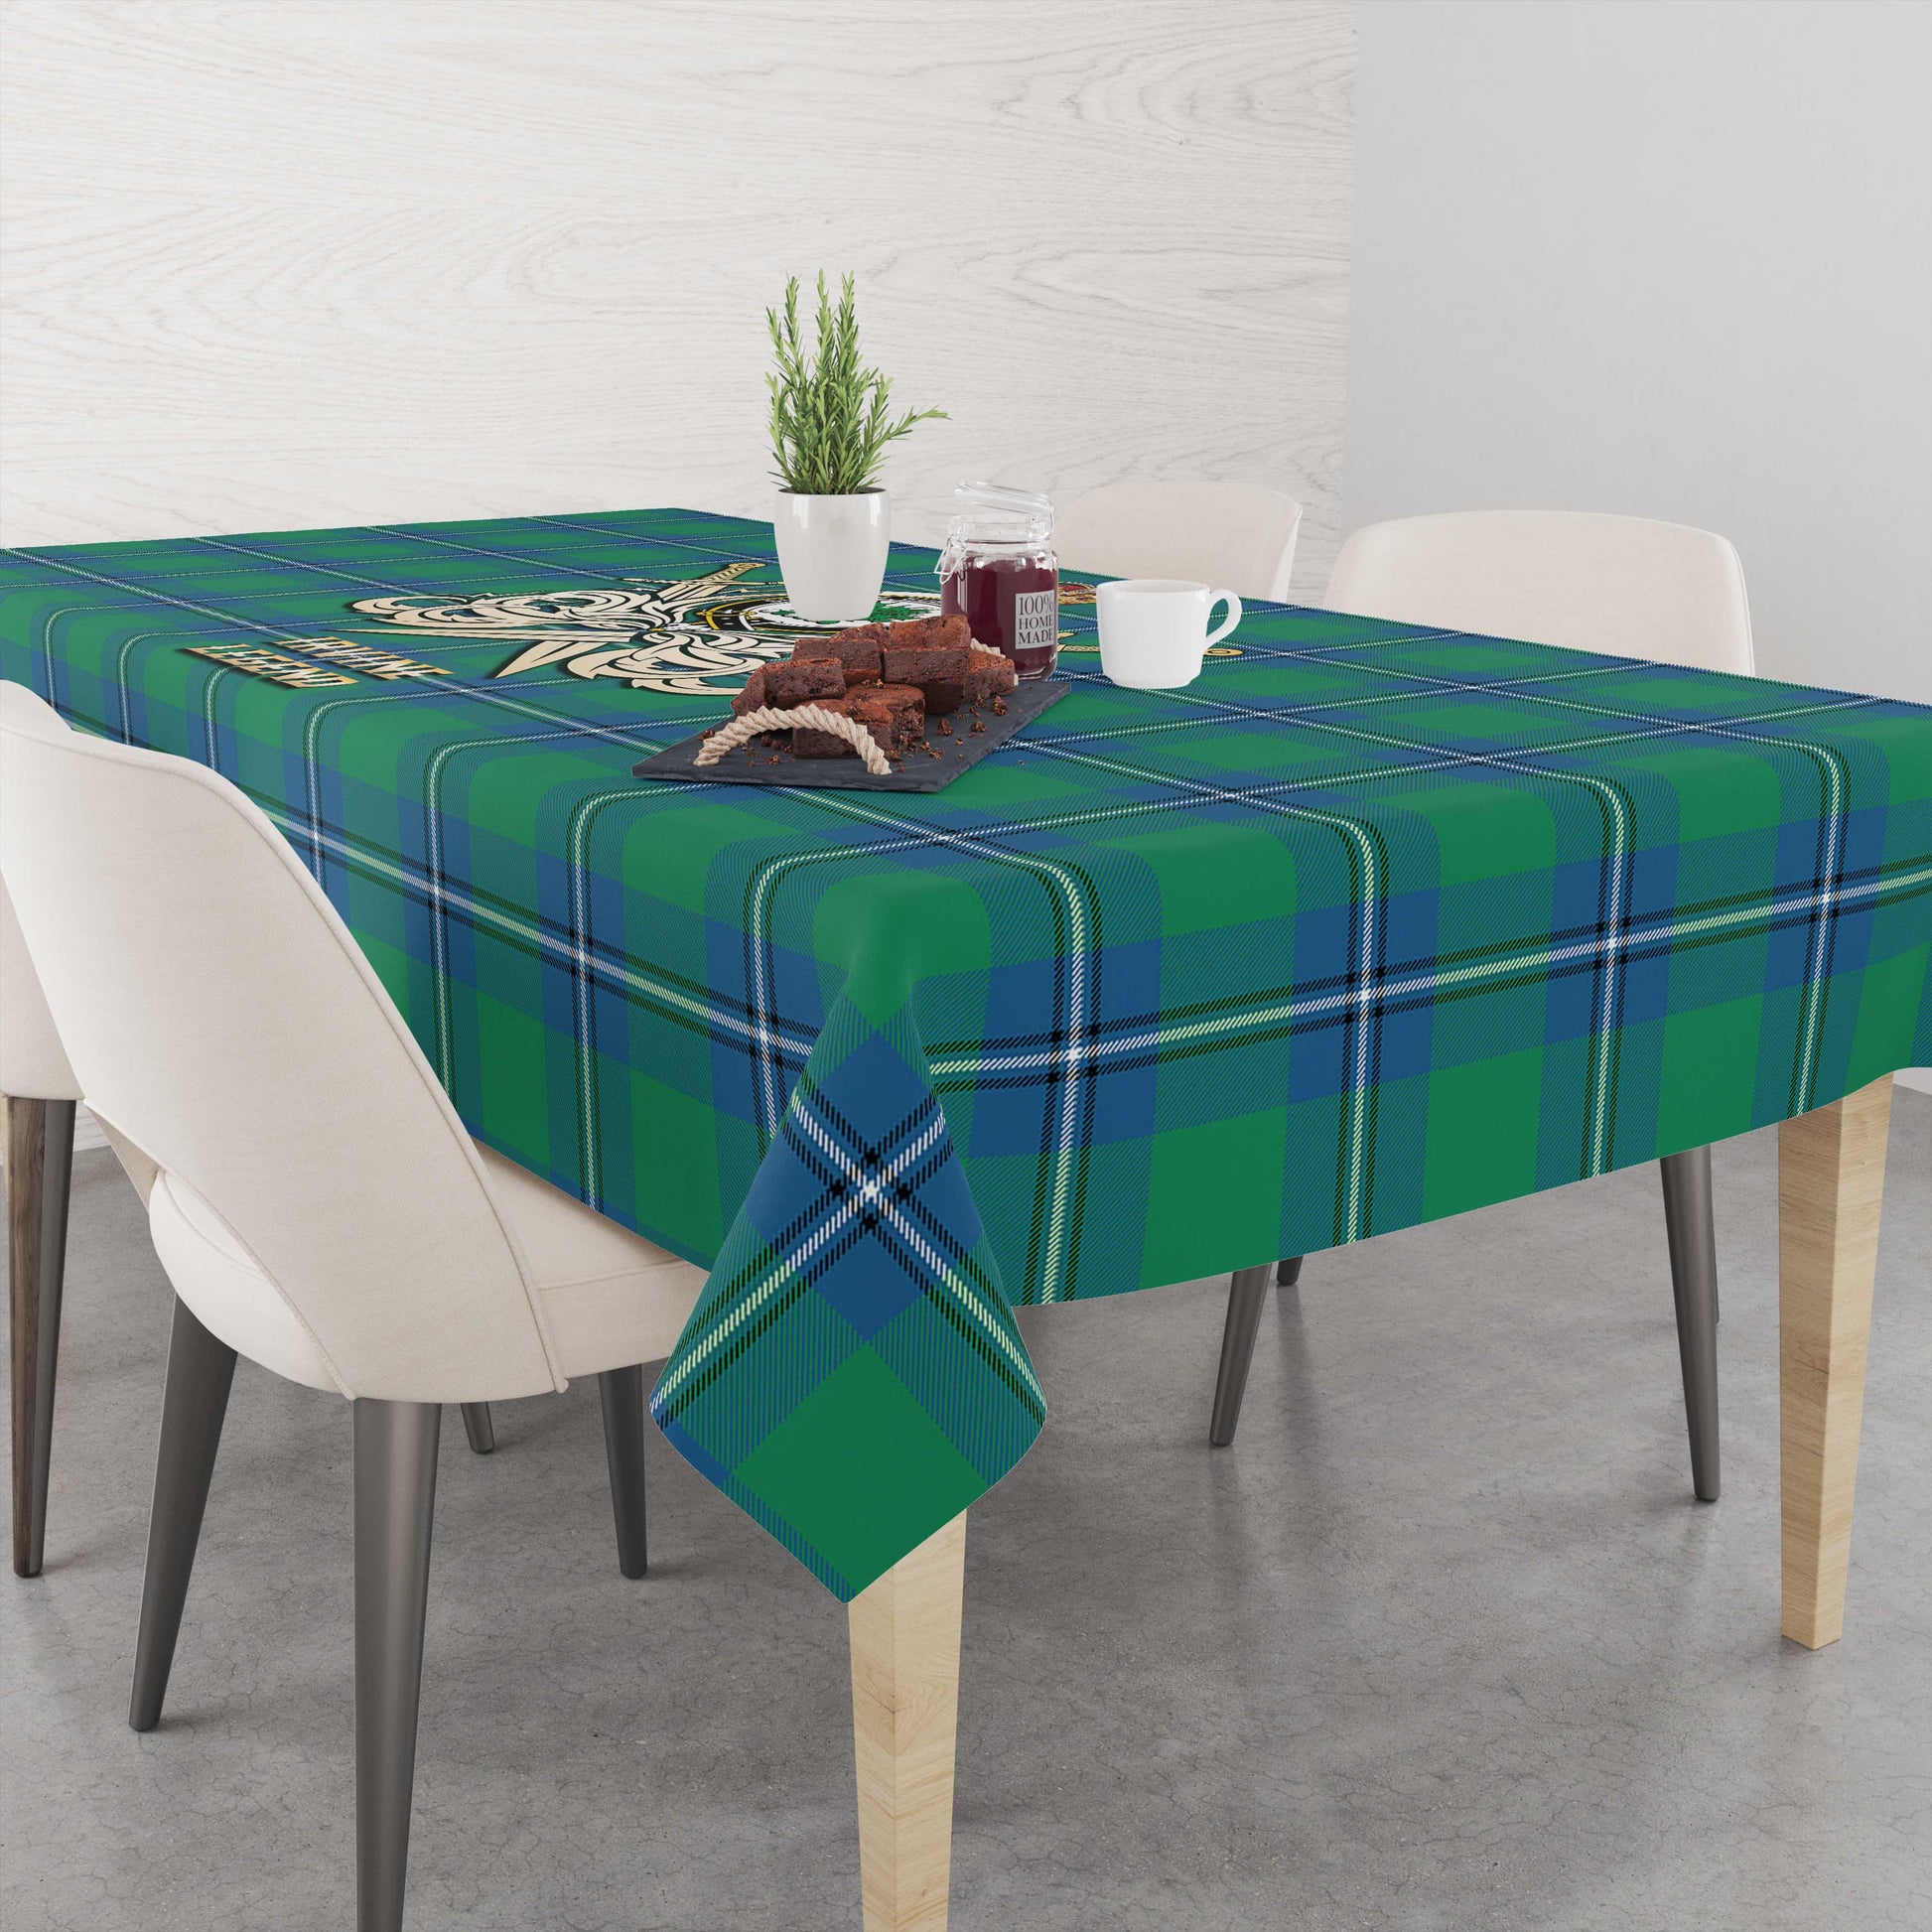 Tartan Vibes Clothing Irvine Ancient Tartan Tablecloth with Clan Crest and the Golden Sword of Courageous Legacy